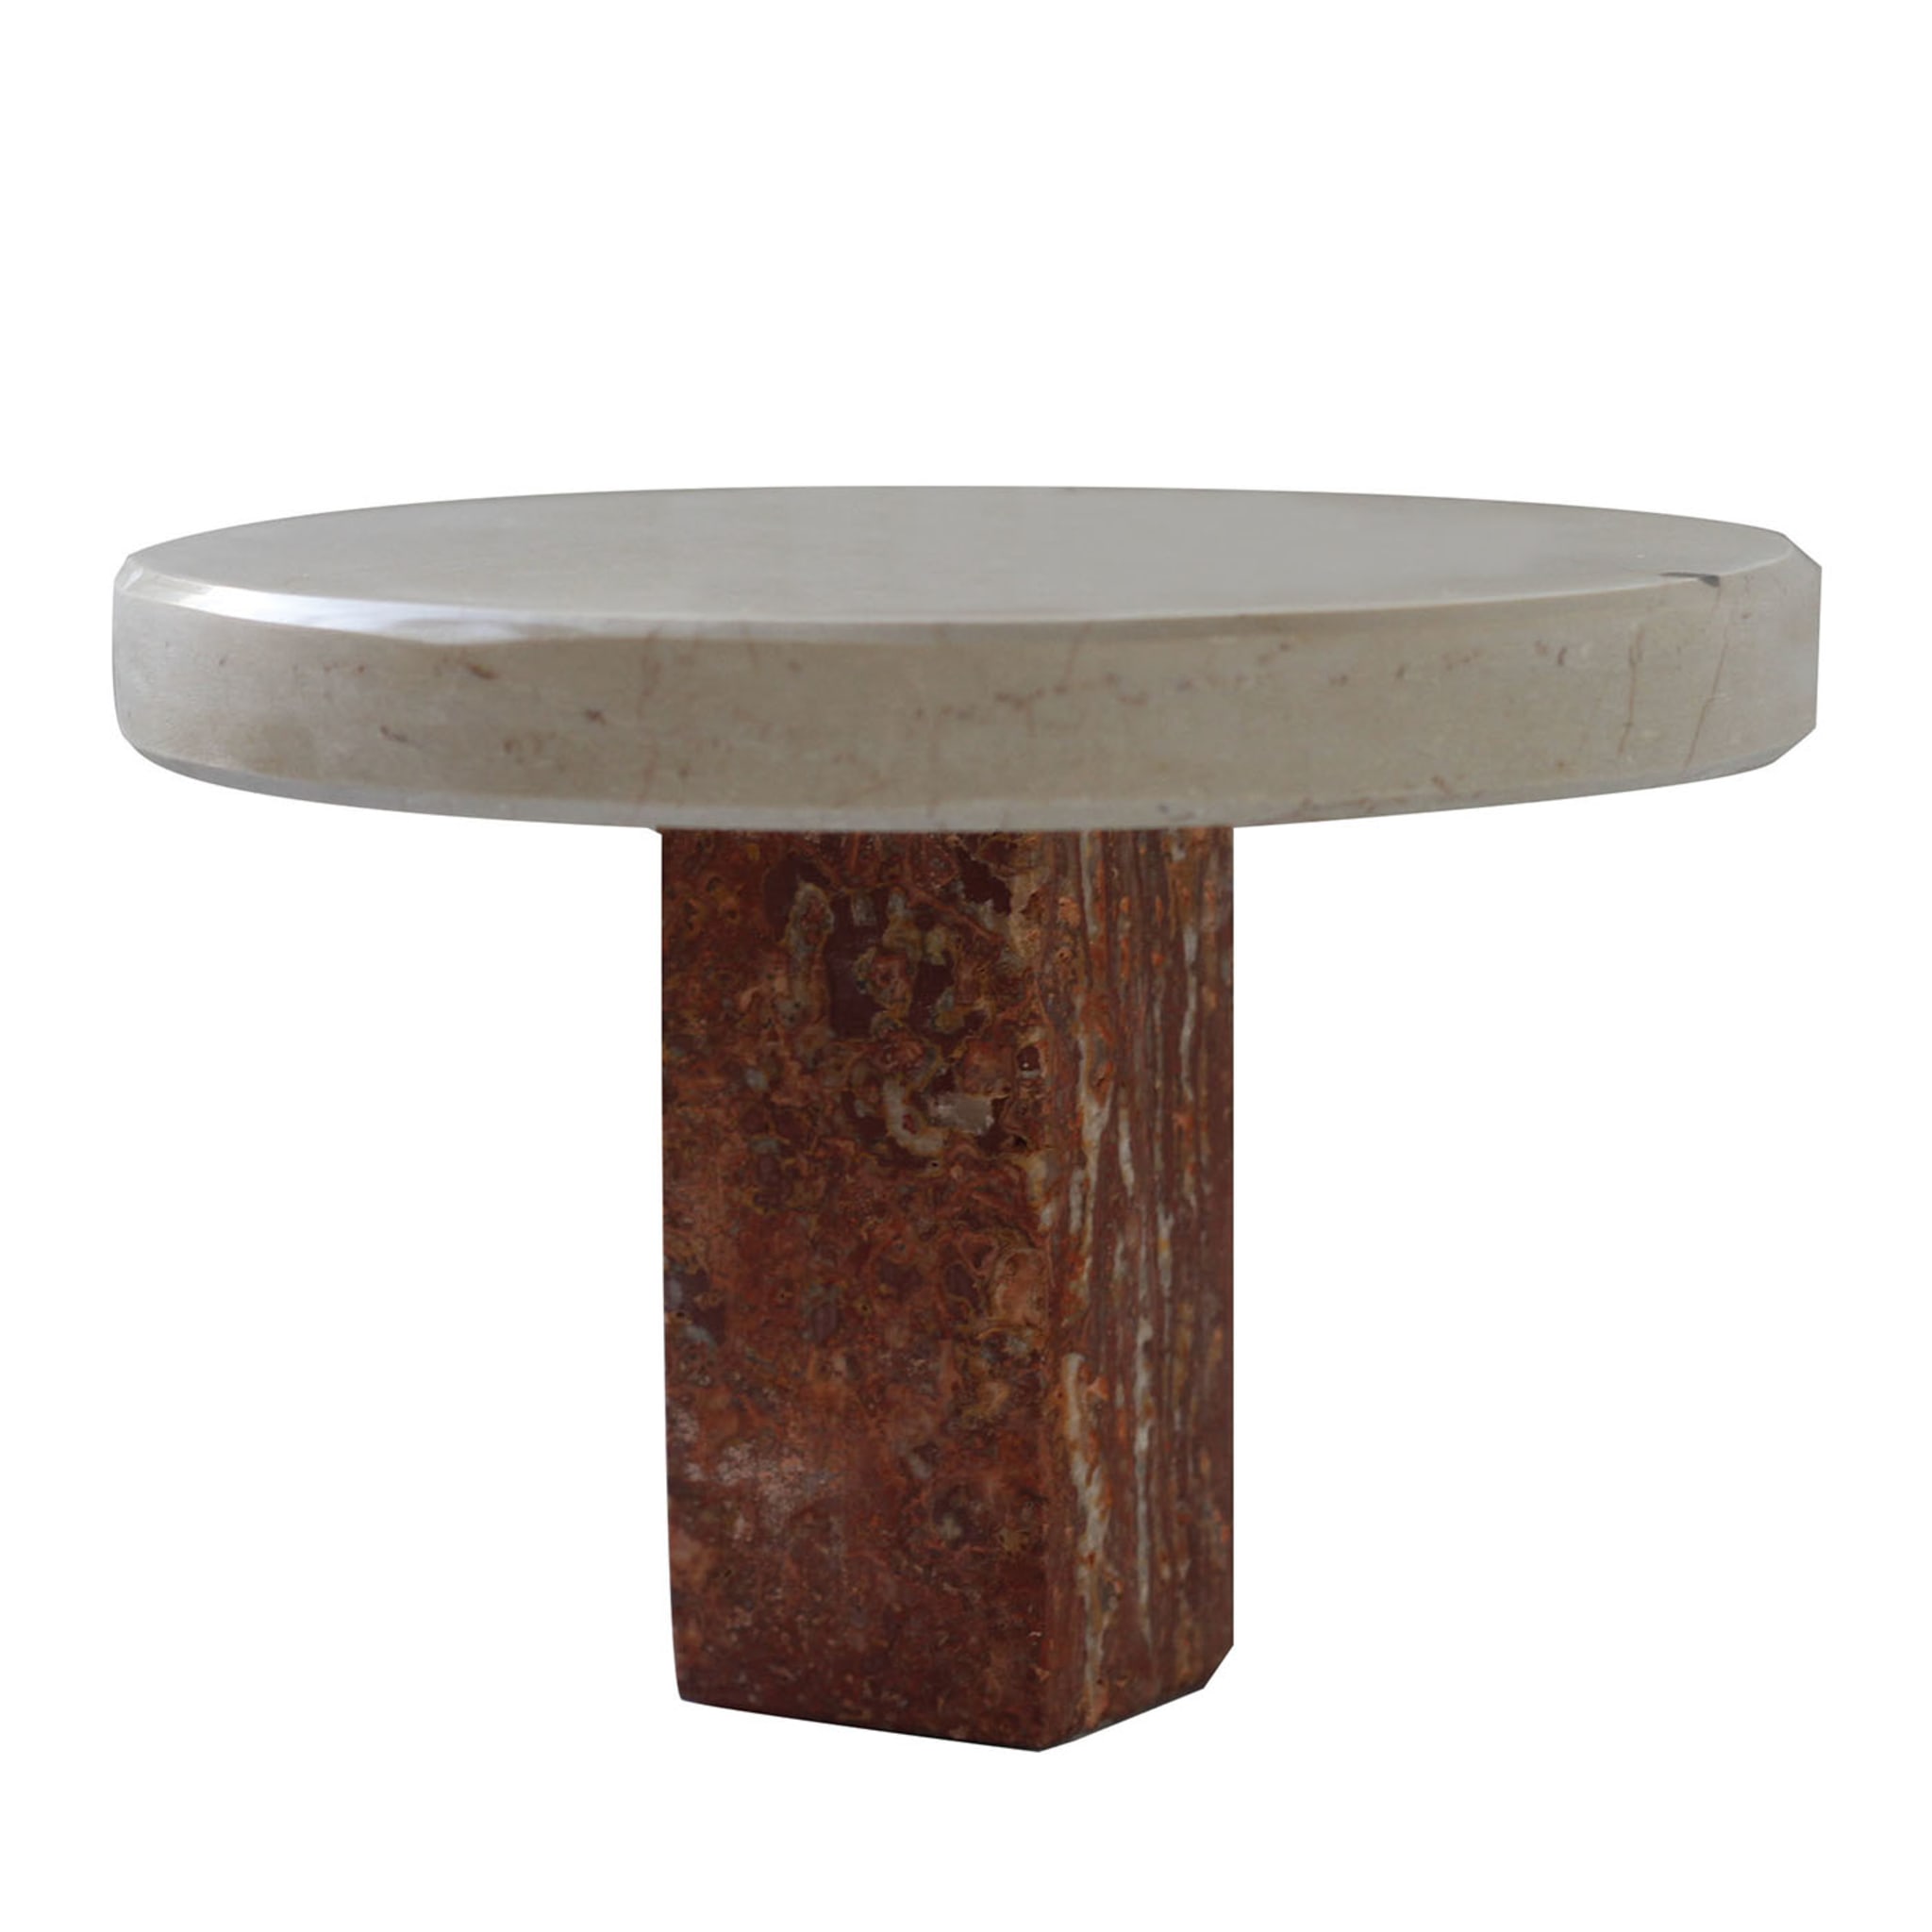 Cake Stand in Apulia Stone and Red Travertine Marble - Main view